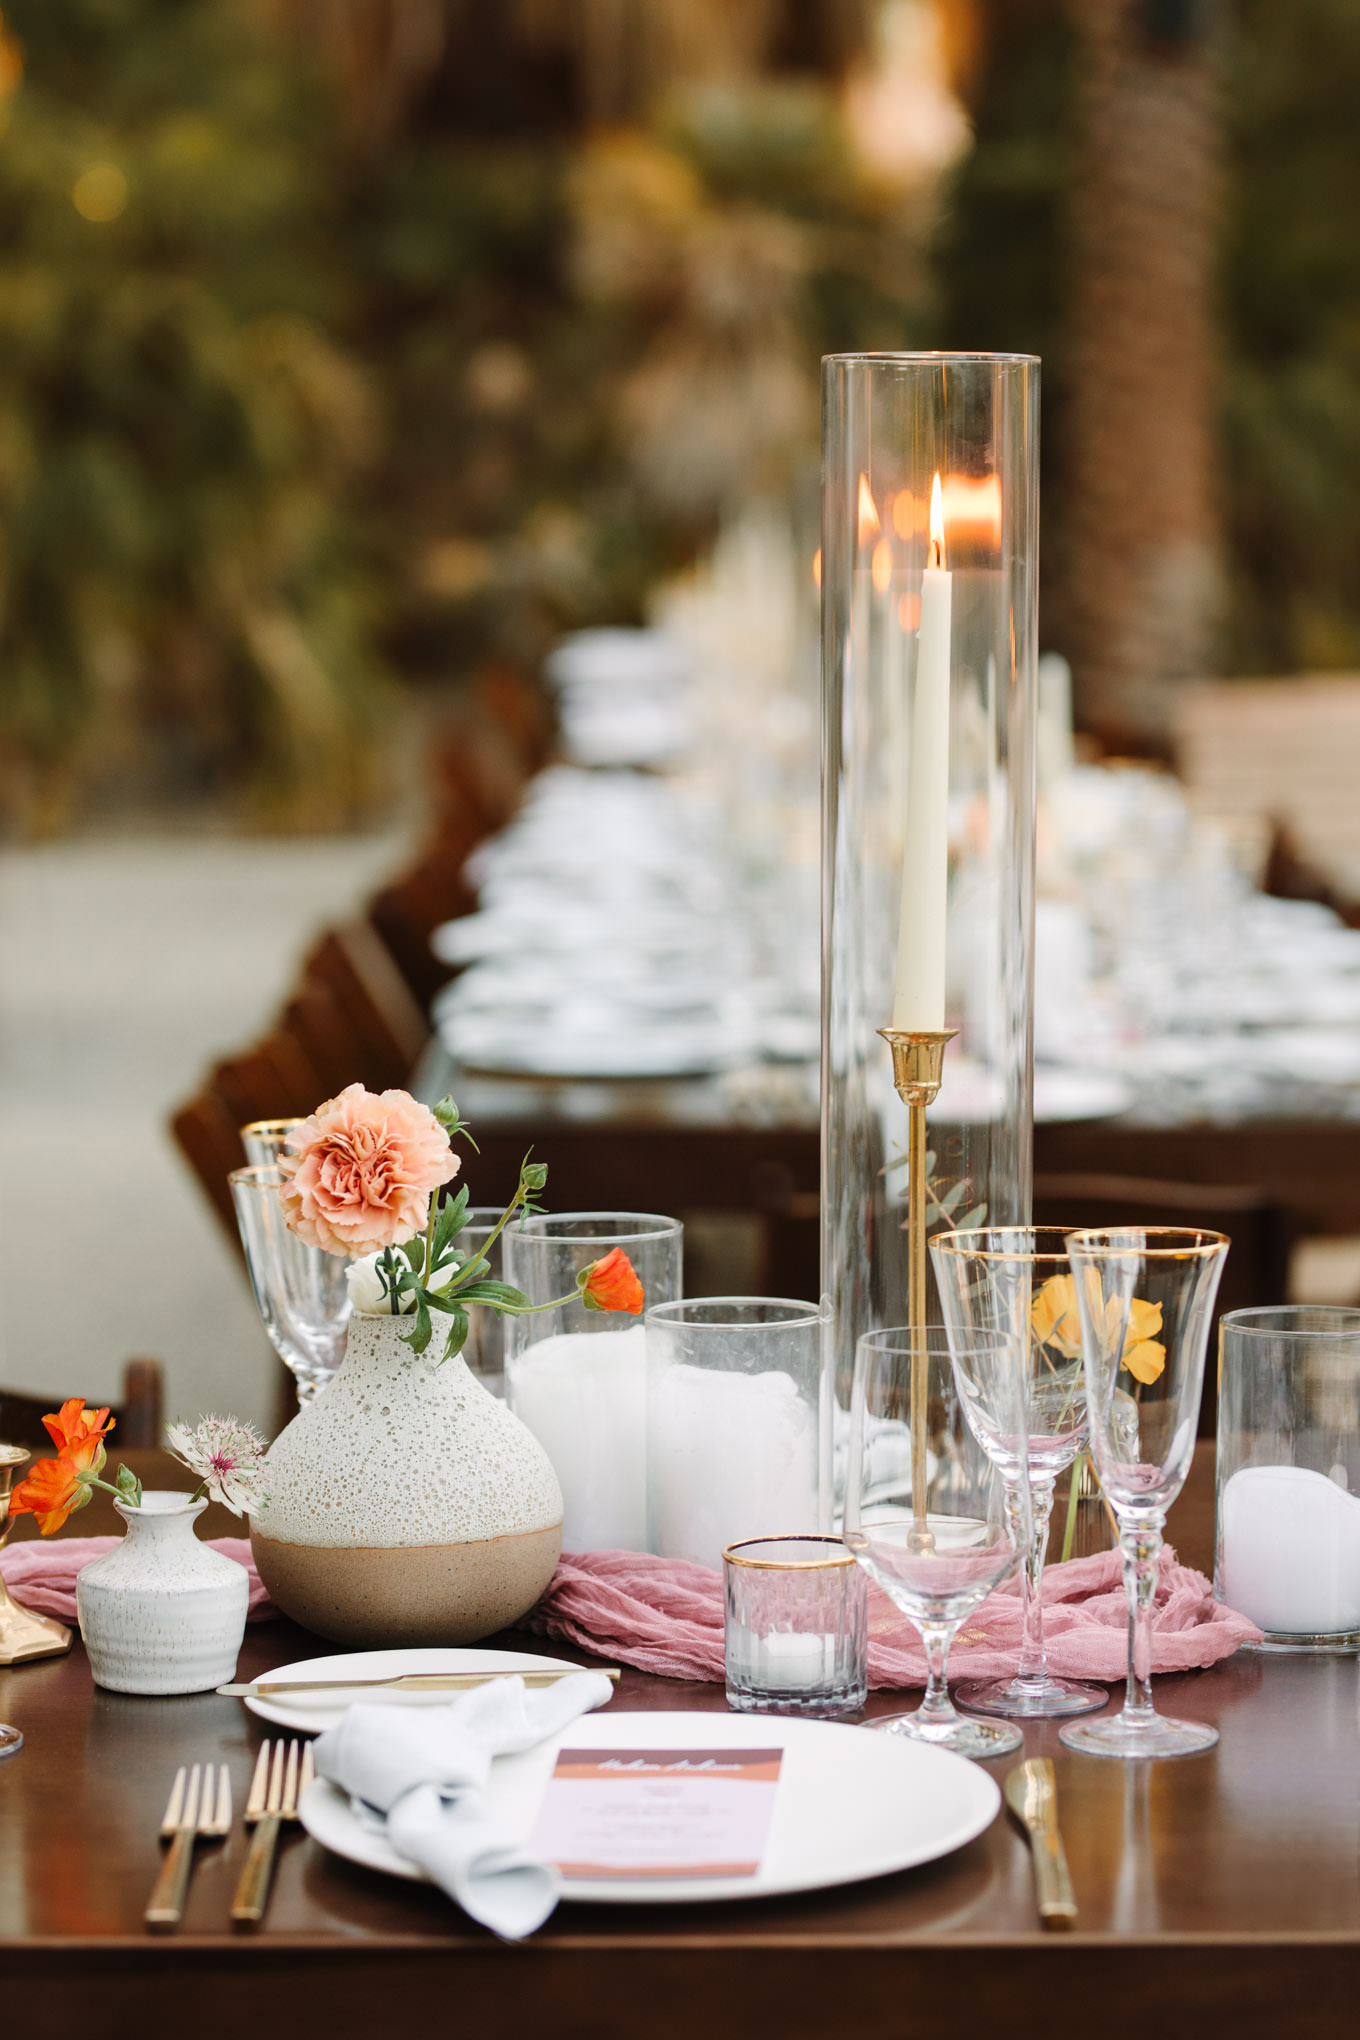 Tall candles and table details at wedding reception | Living Desert Zoo & Gardens wedding with unique details | Elevated and colorful wedding photography for fun-loving couples in Southern California |  #PalmSprings #palmspringsphotographer #gardenwedding #palmspringswedding  Source: Mary Costa Photography | Los Angeles wedding photographer 